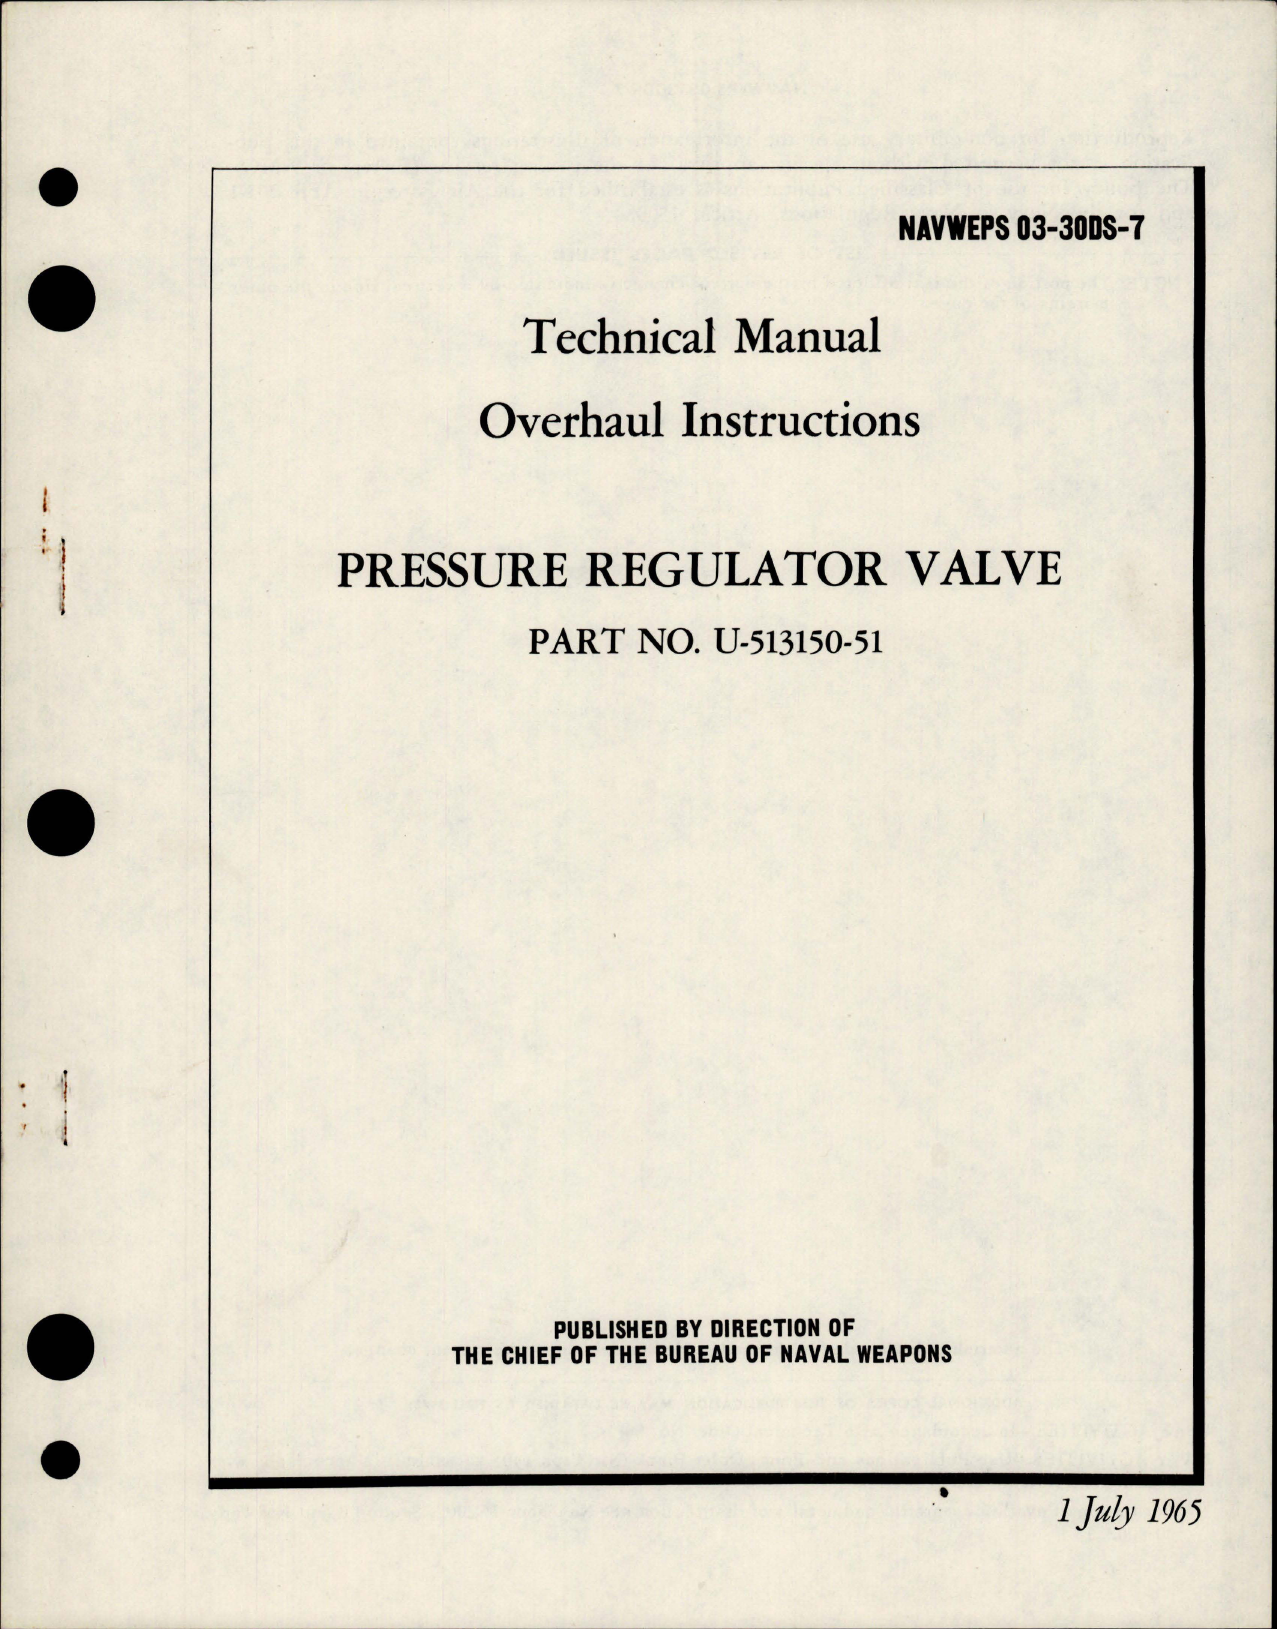 Sample page 1 from AirCorps Library document: Overhaul Instructions for Pressure Regulator Valve - Part U-513150-51 